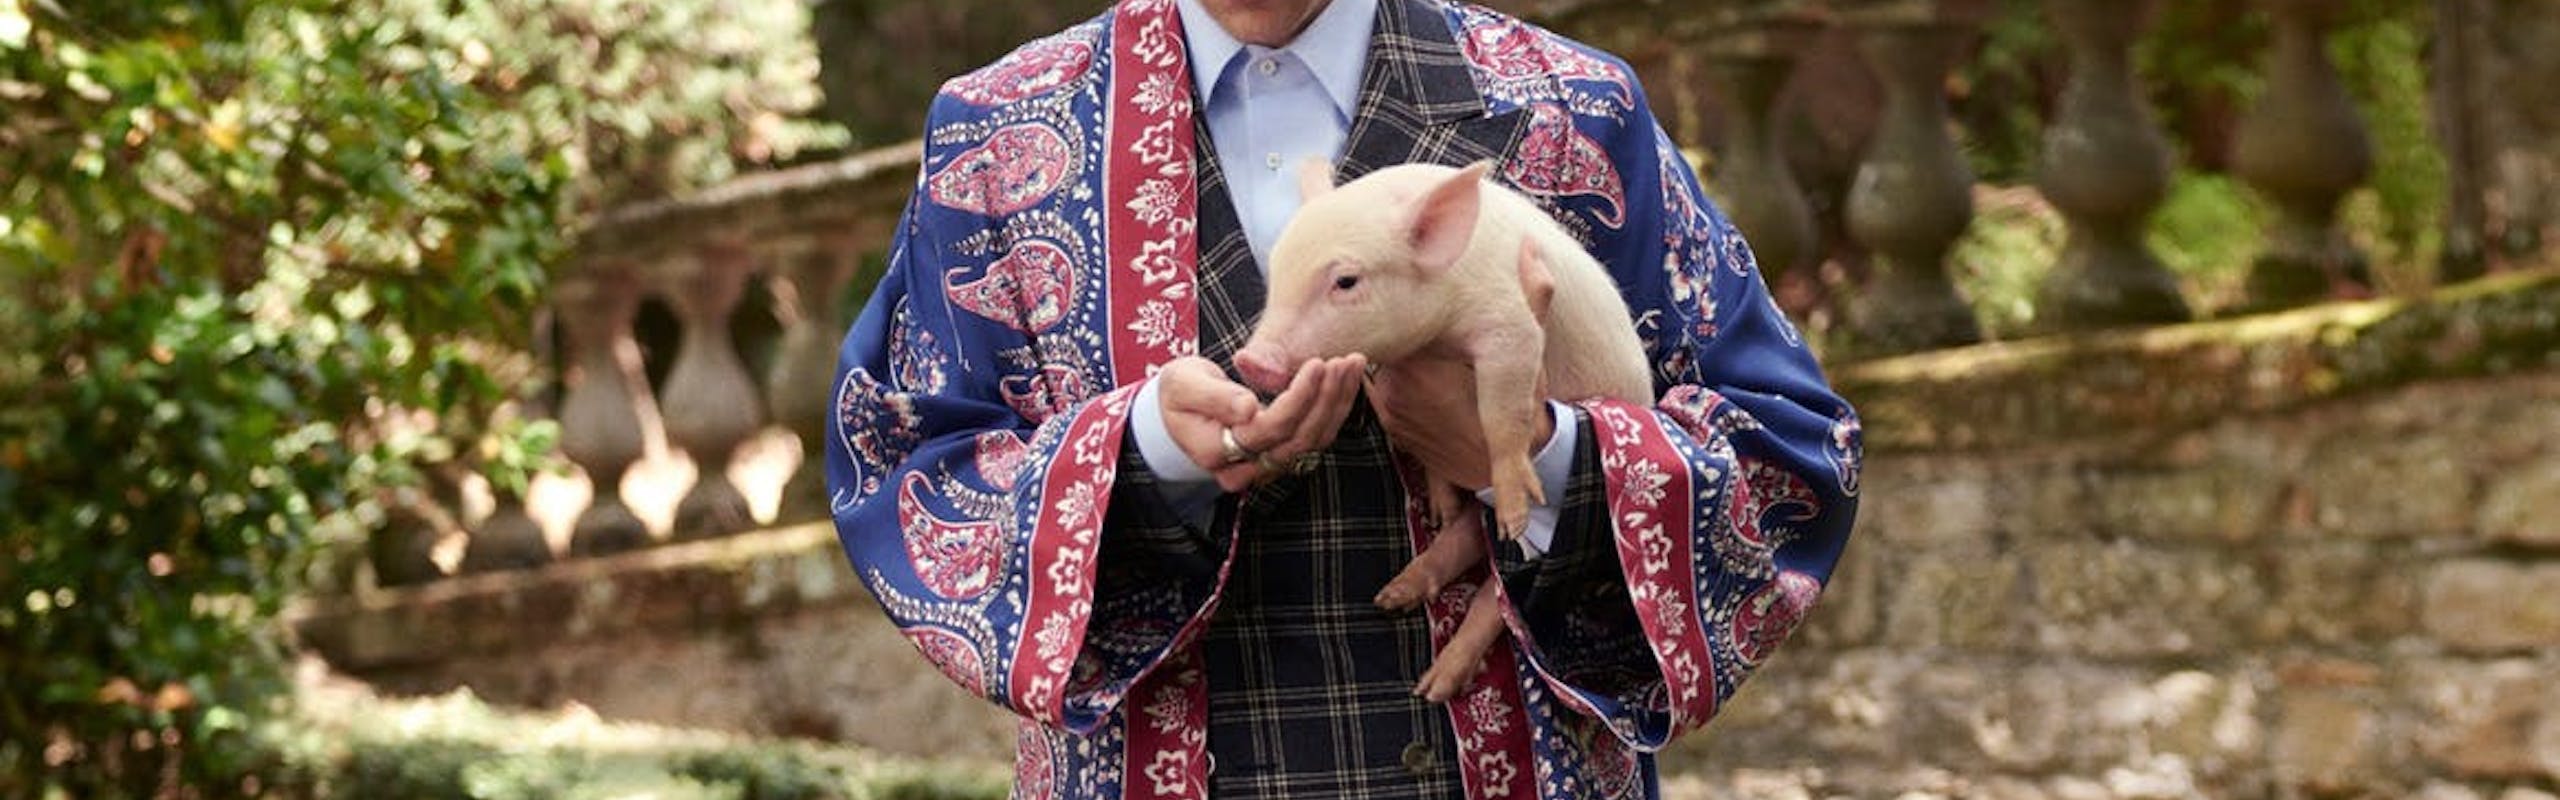 Harry Styles holding a baby pig wearing a plaid suit and printed jacket